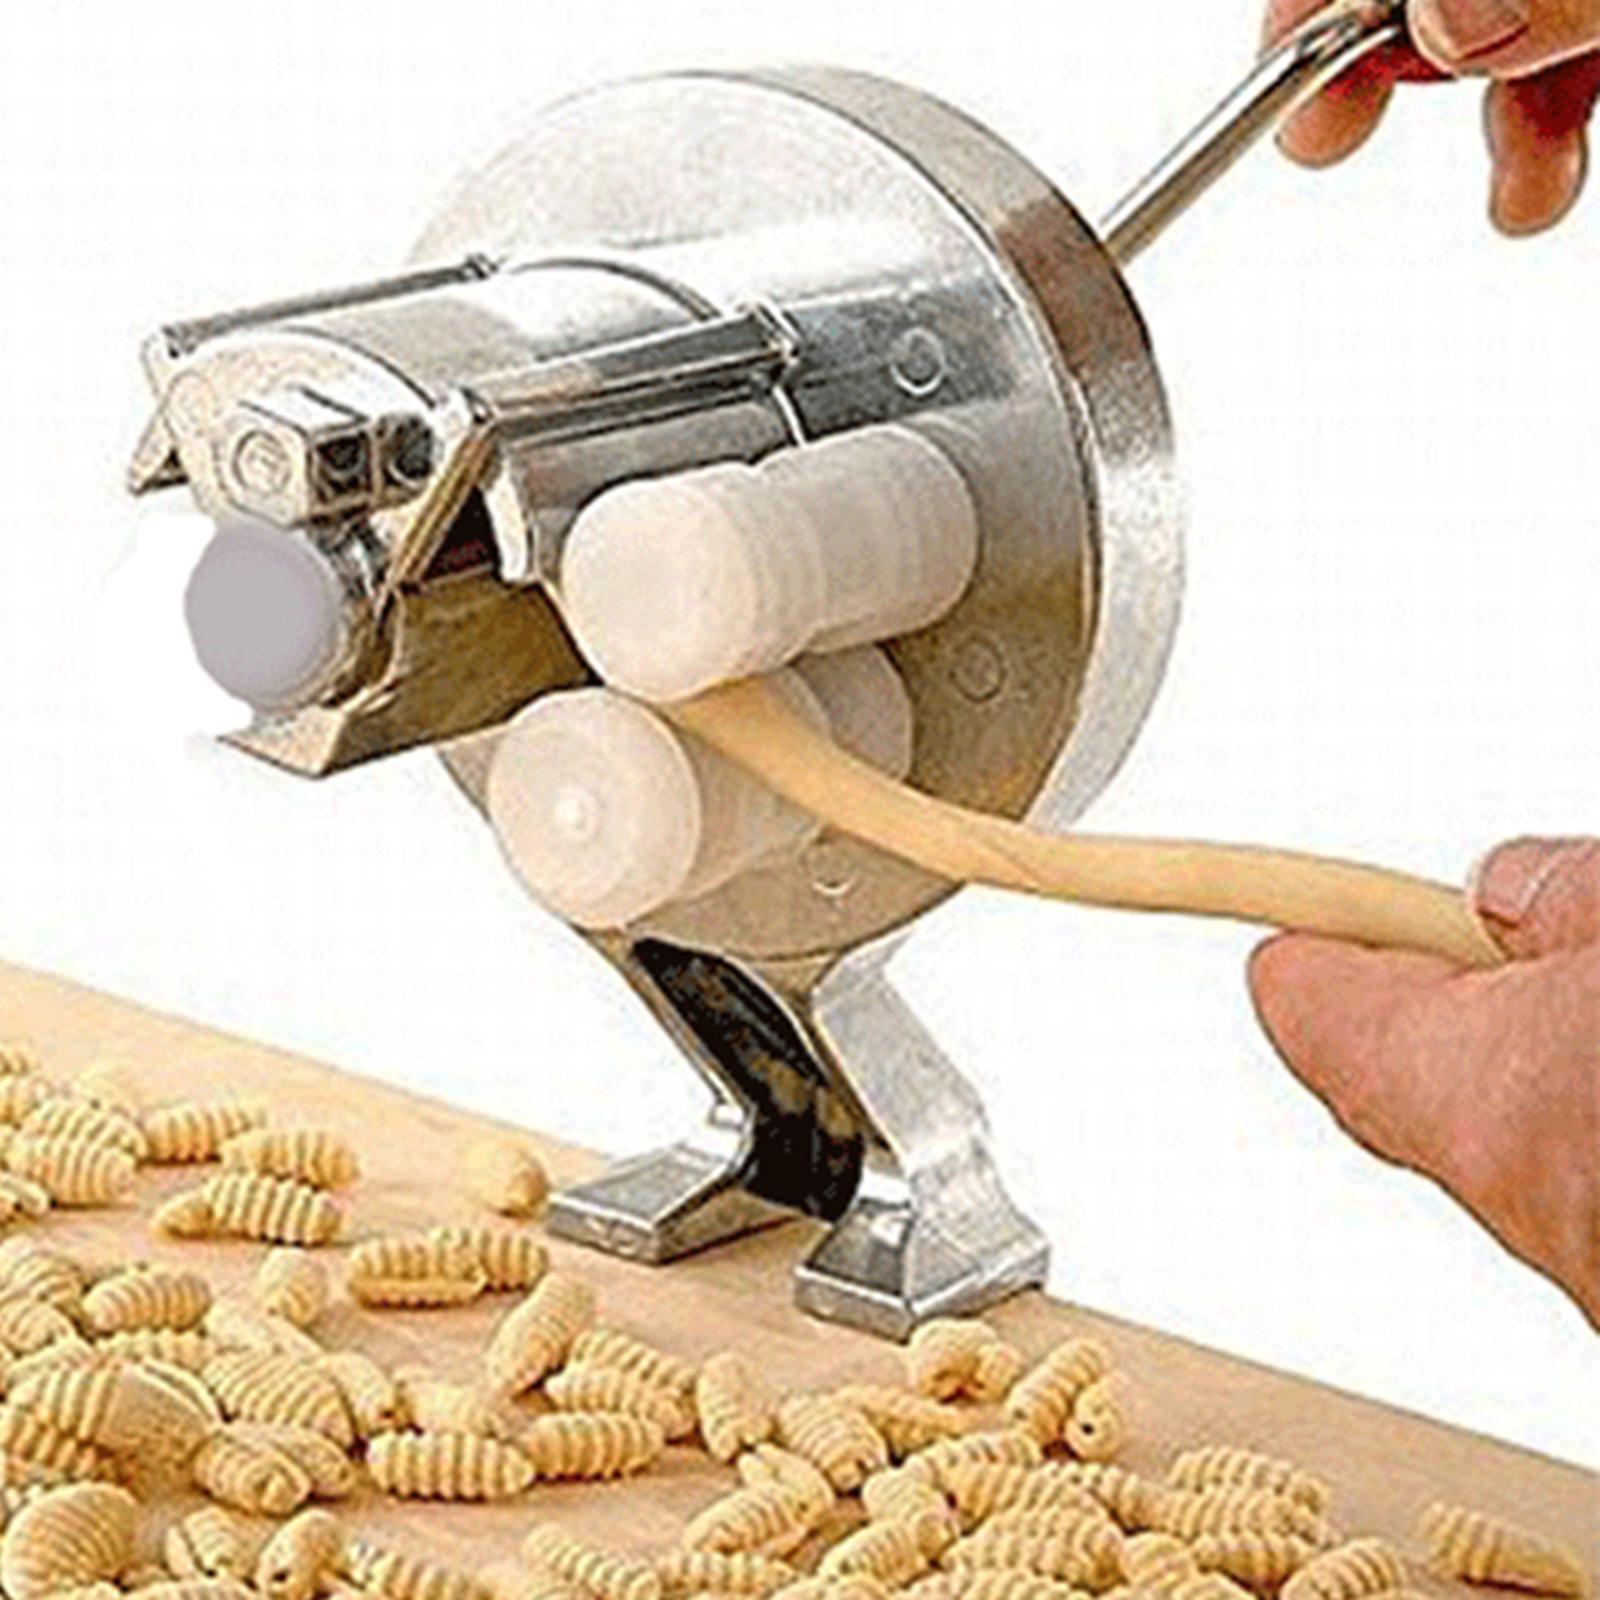 Hand Press Pasta Maker Machine Kitchen Accessories Portable with Hand Crank DIY Small Noodle Makers for Baking Restaurant Party